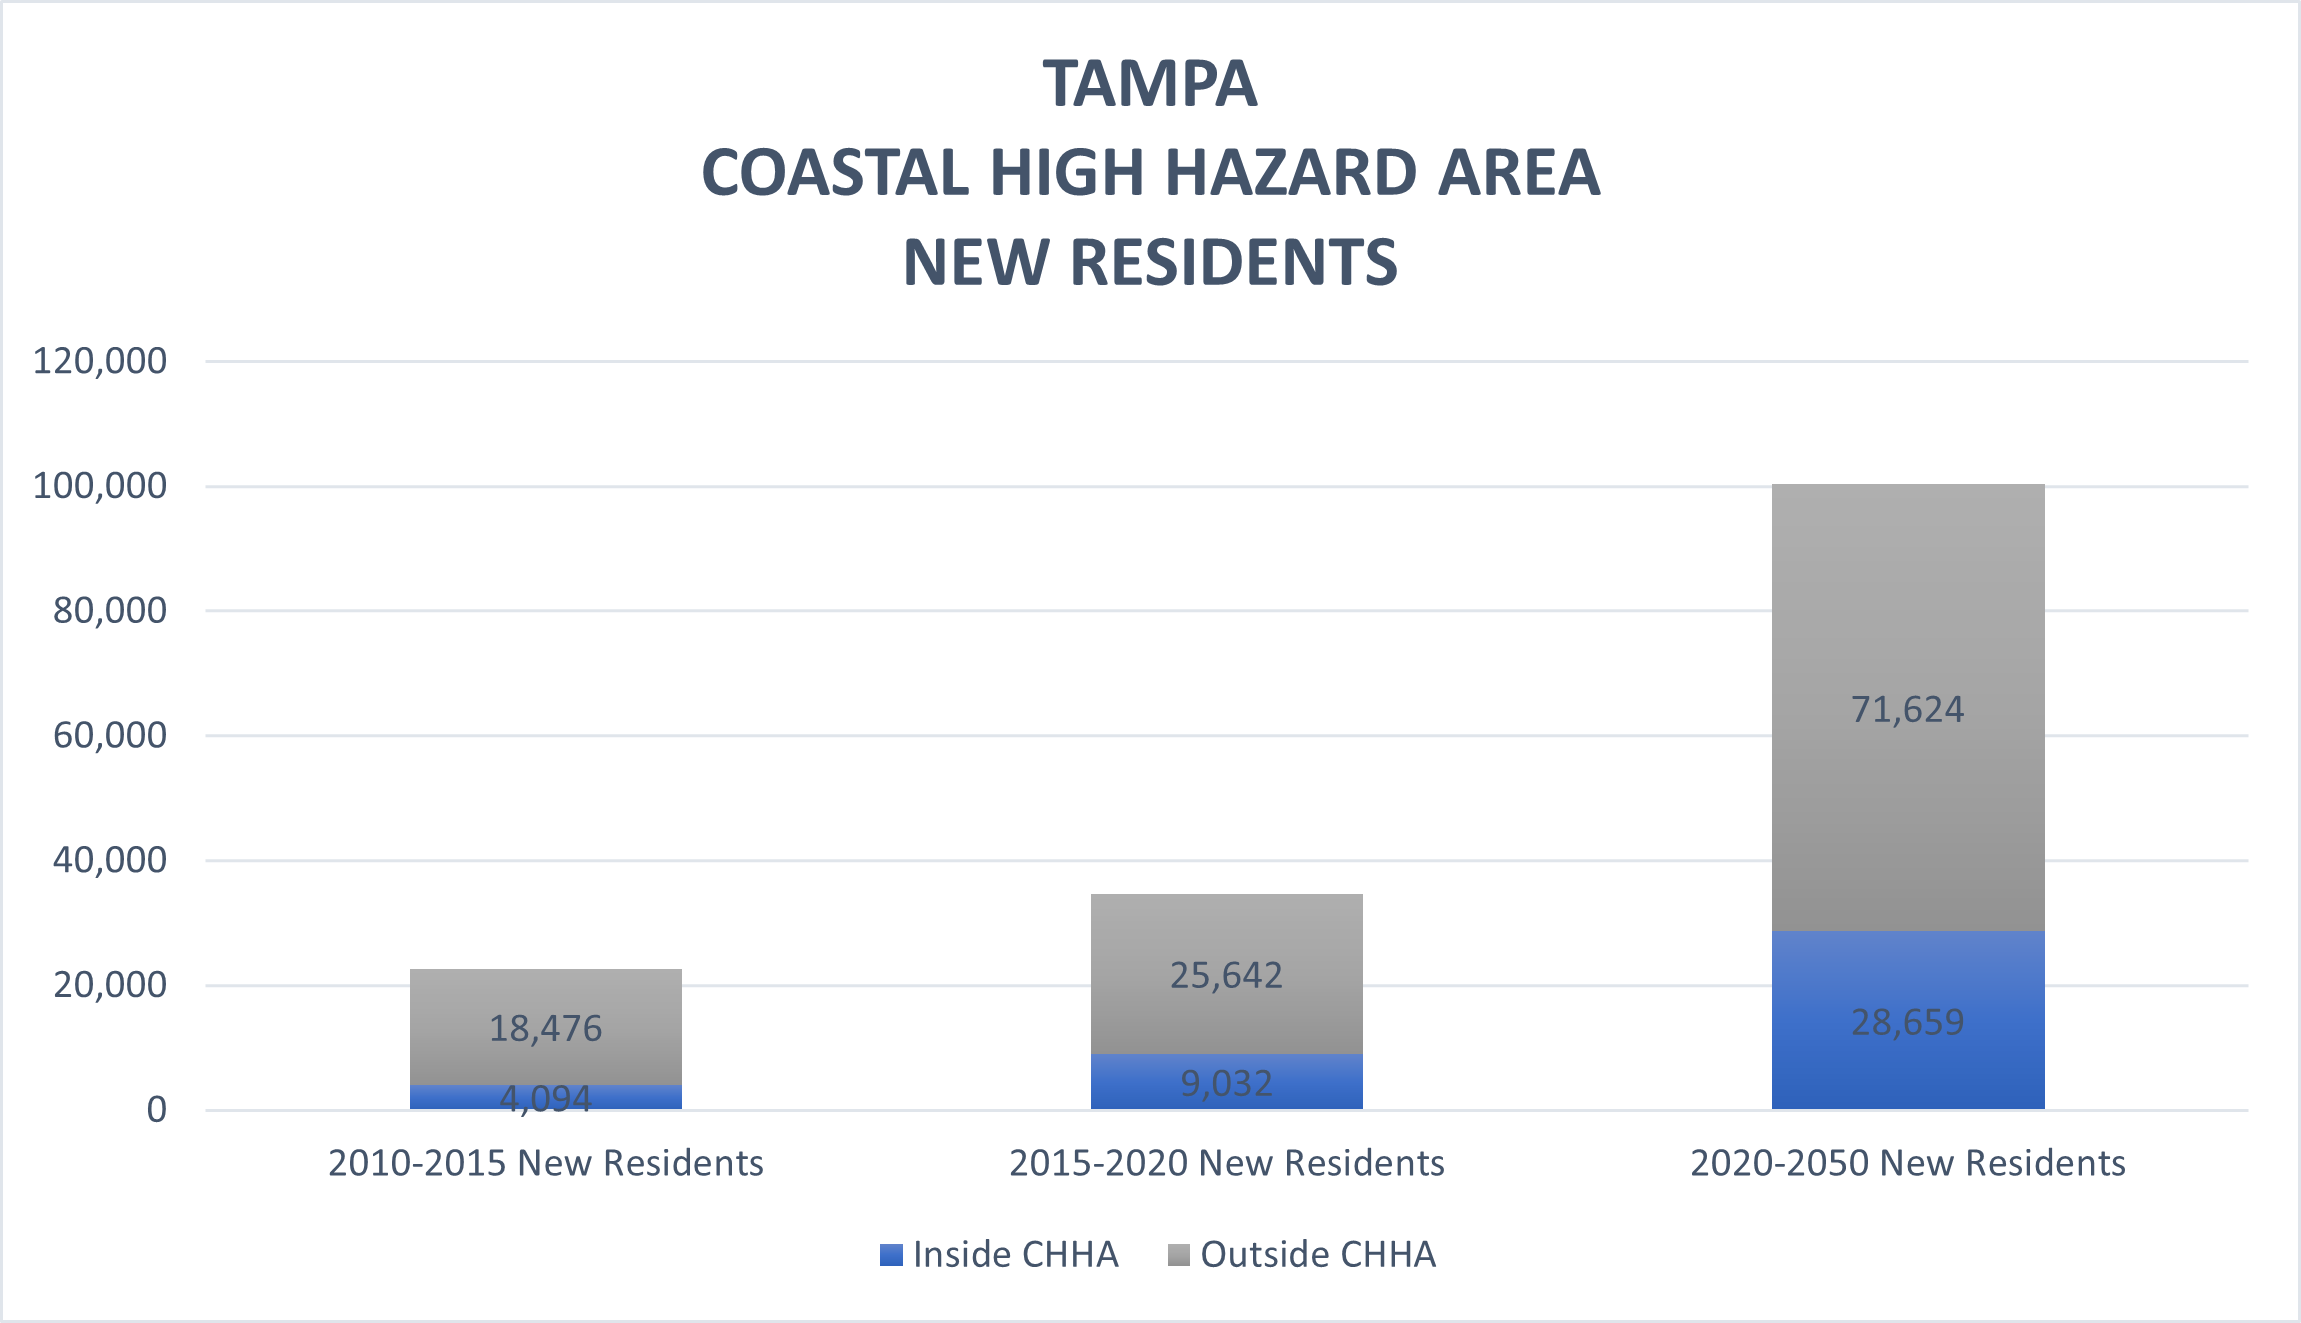 This chart shows Tampa's new residents inside and outside the CHHA. From 2015 to 2020, 9,032 new residents moved inside the CHHA and 25,642 new residents moved outside CHHA. From 2020 to 2050, 28,659 new residents are expected to move inside the CHHA and 71,624 new residents are expected to move outside the CHHA.